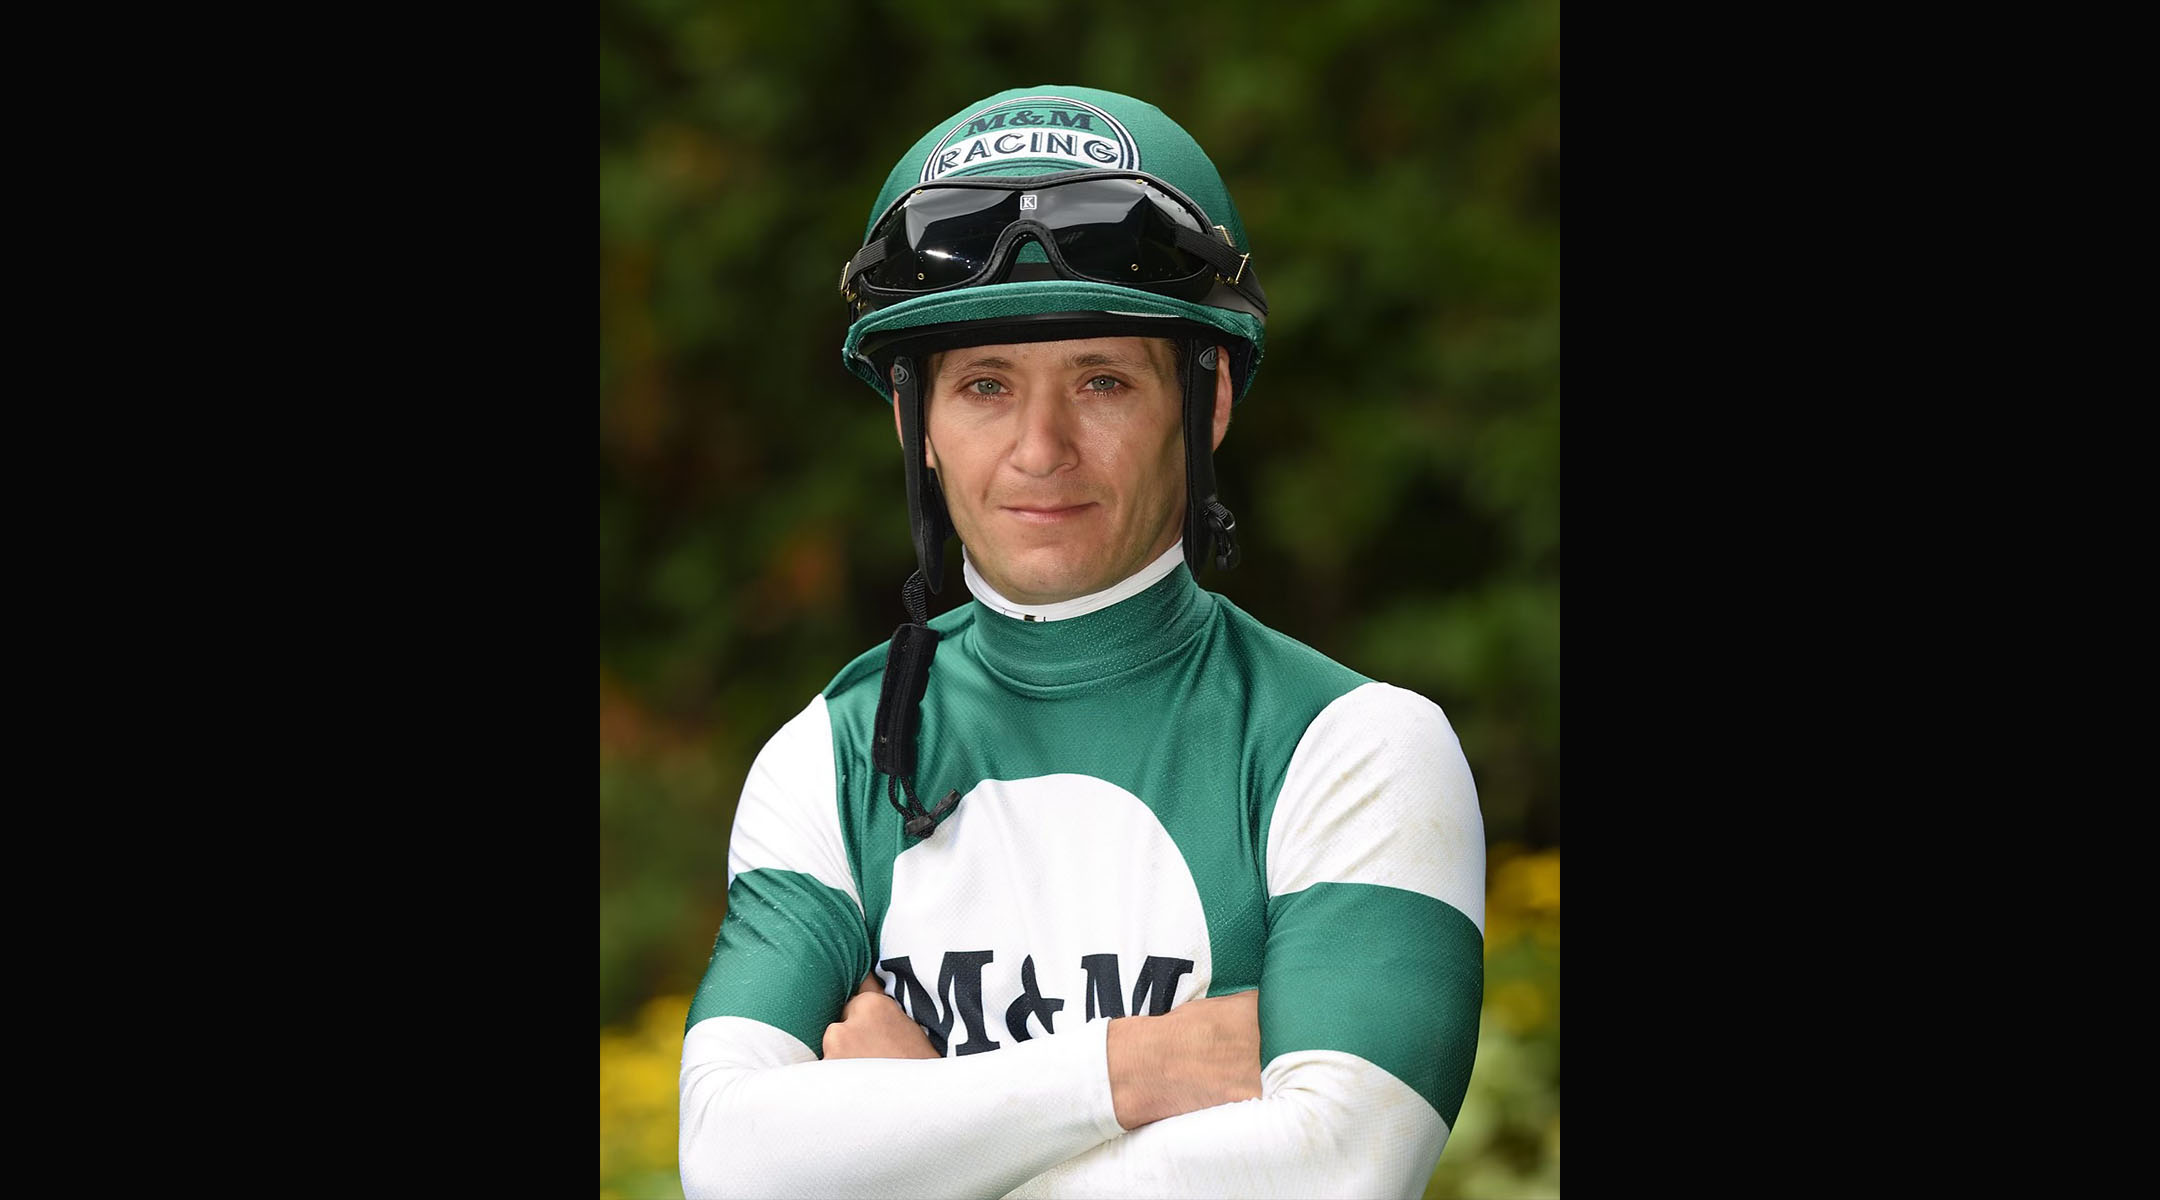 Meet 'Big Money' - jockey who was engaged to one of the world's